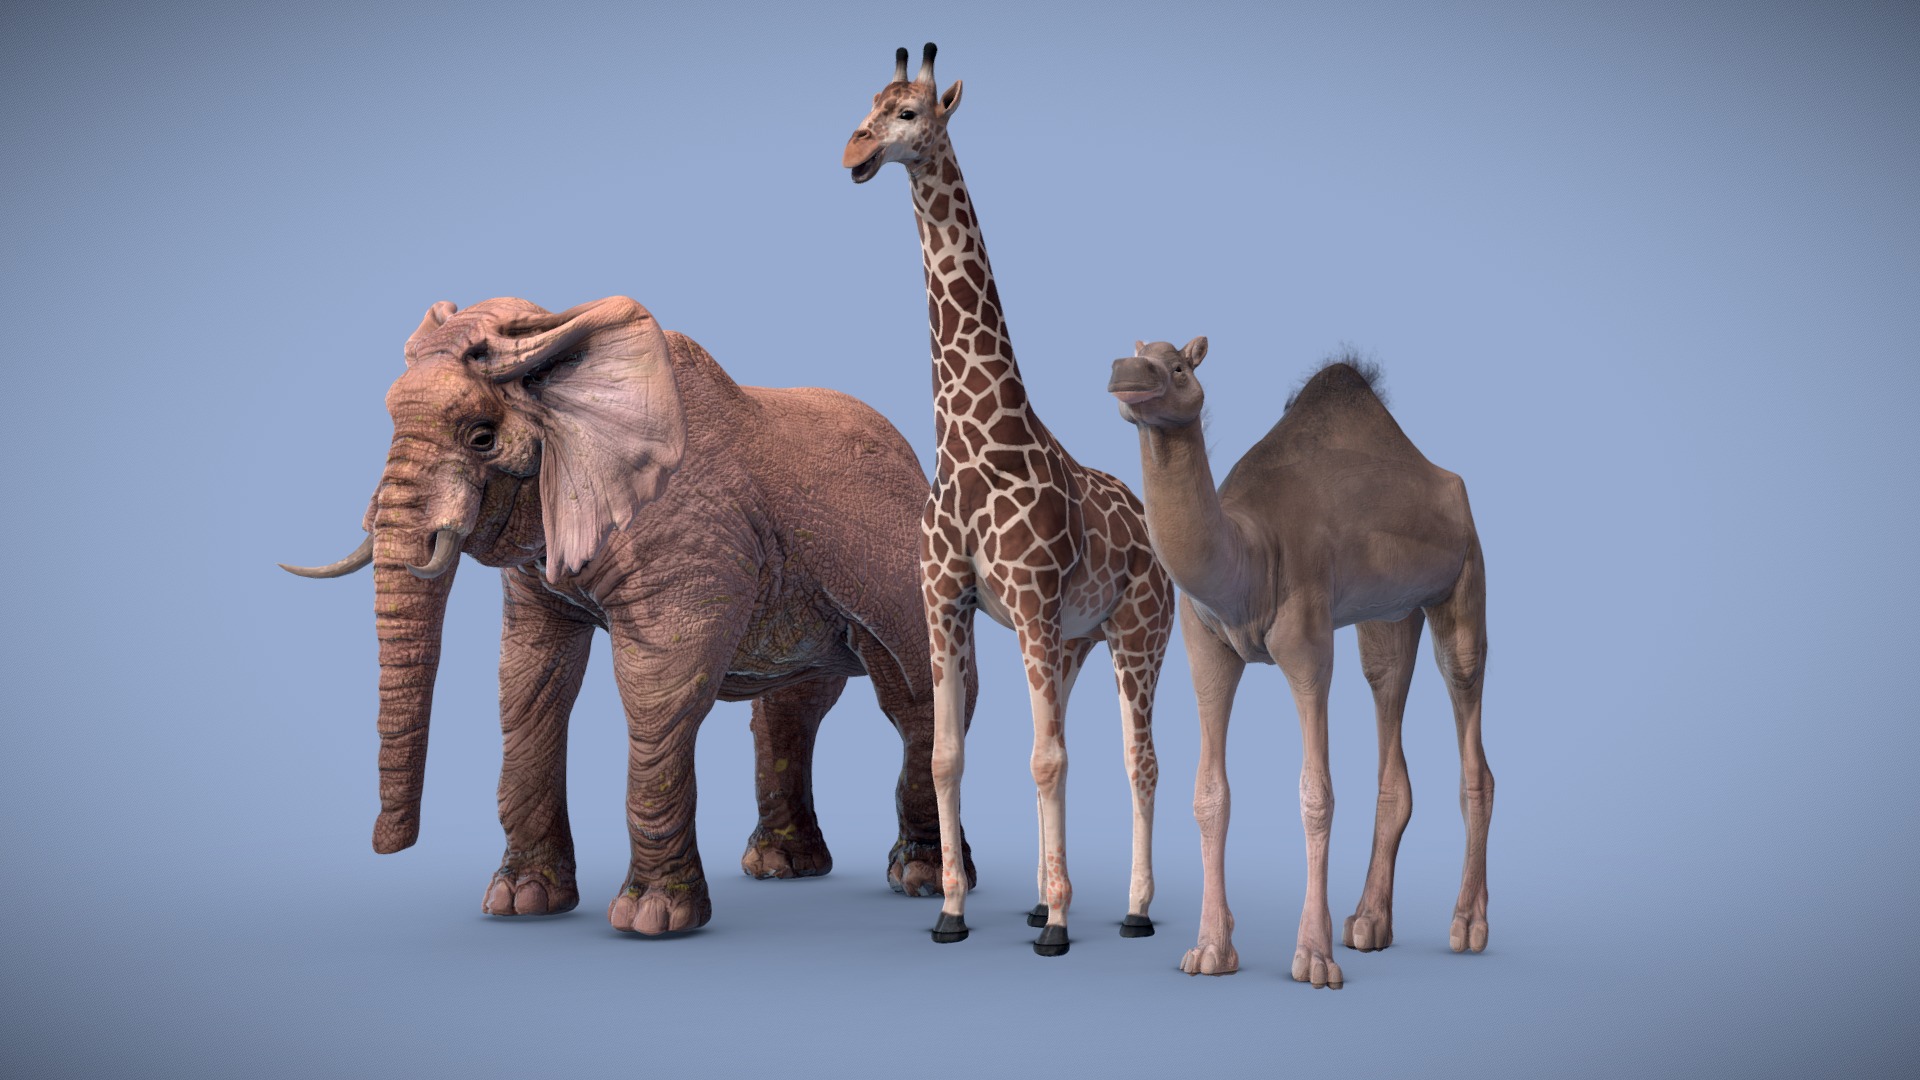 3D model Animal Pack 1 - This is a 3D model of the Animal Pack 1. The 3D model is about a group of elephants and a giraffe.